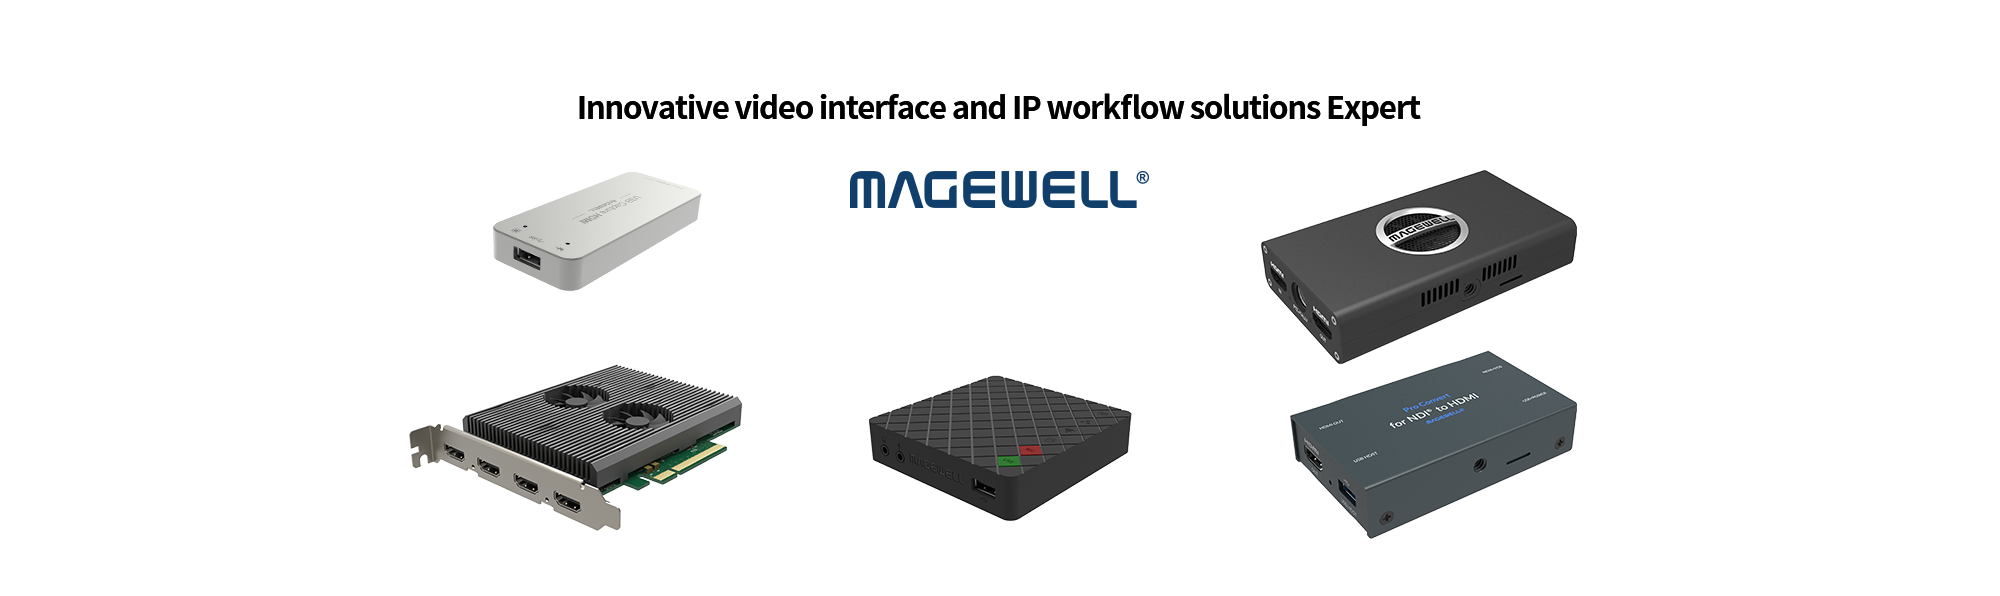 Magewell Products